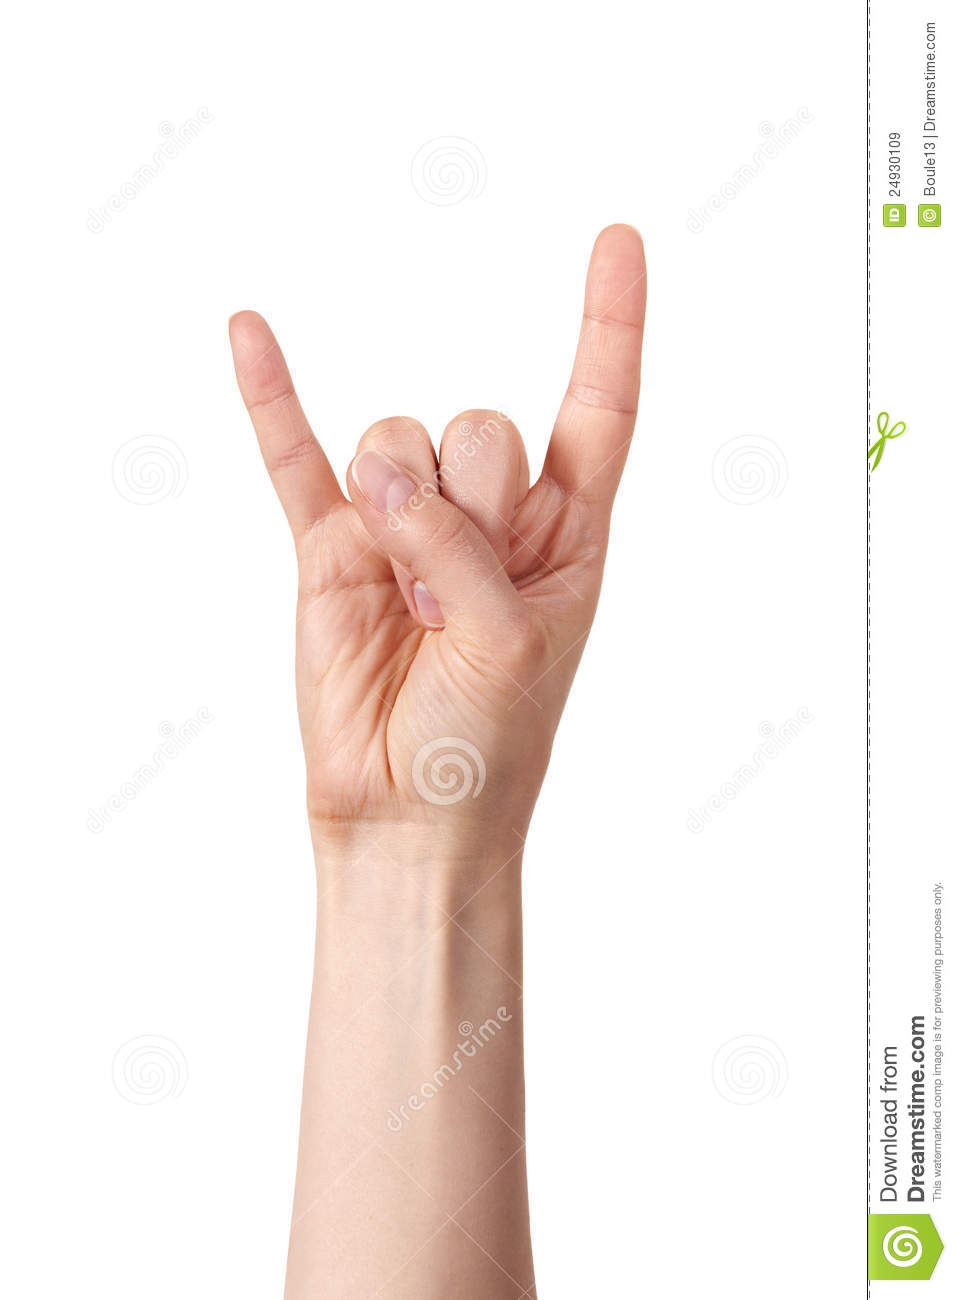 Love You Hand Gesture Royalty Free Stock Images   Image  24930109